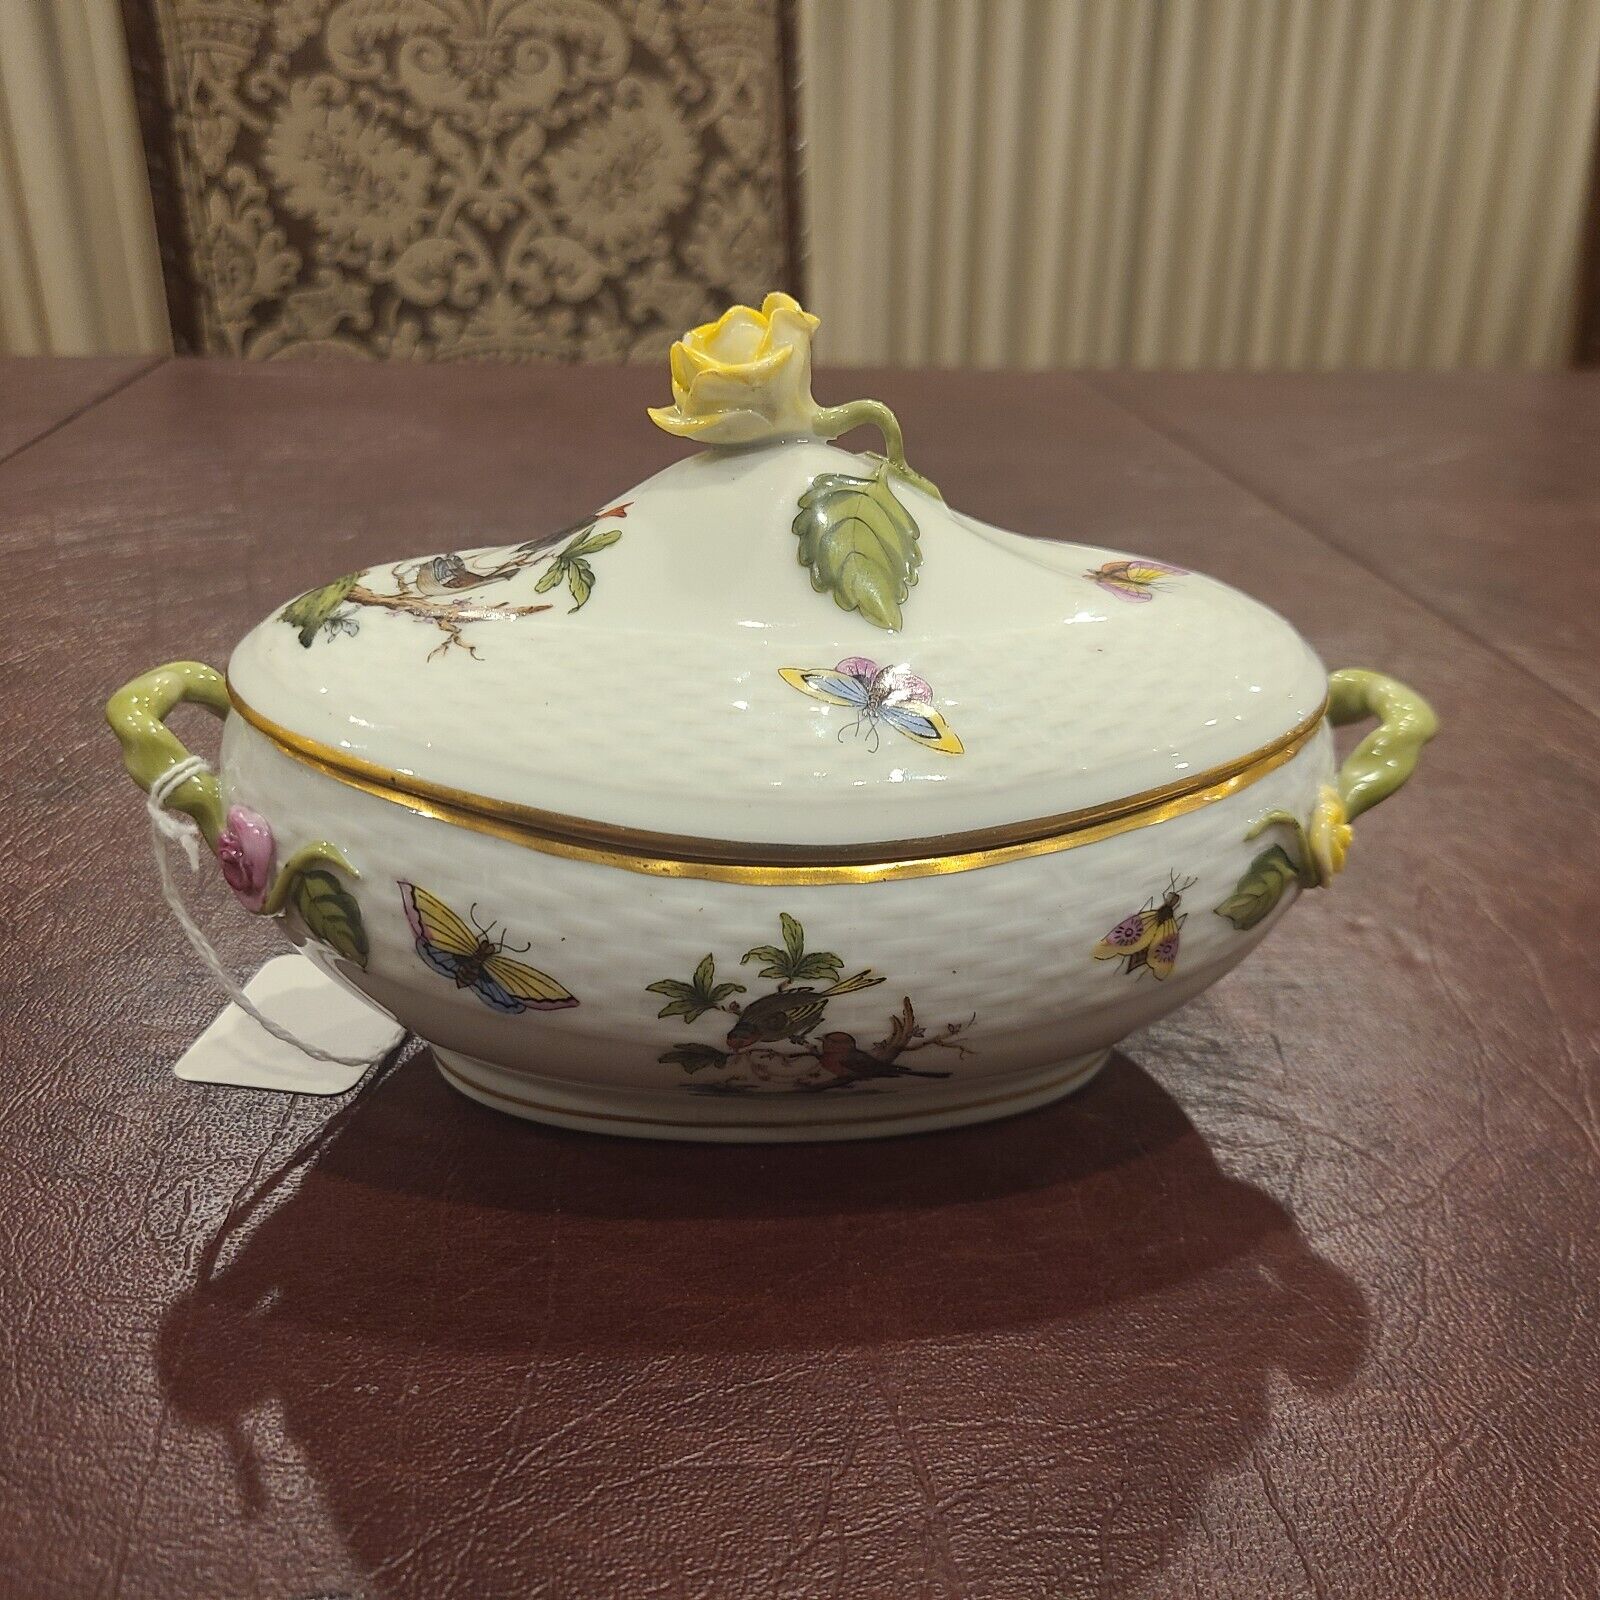 Herend Hungary Rothschild Porcelain Covered Oval Bonbon Dish W Roses & Butterfly